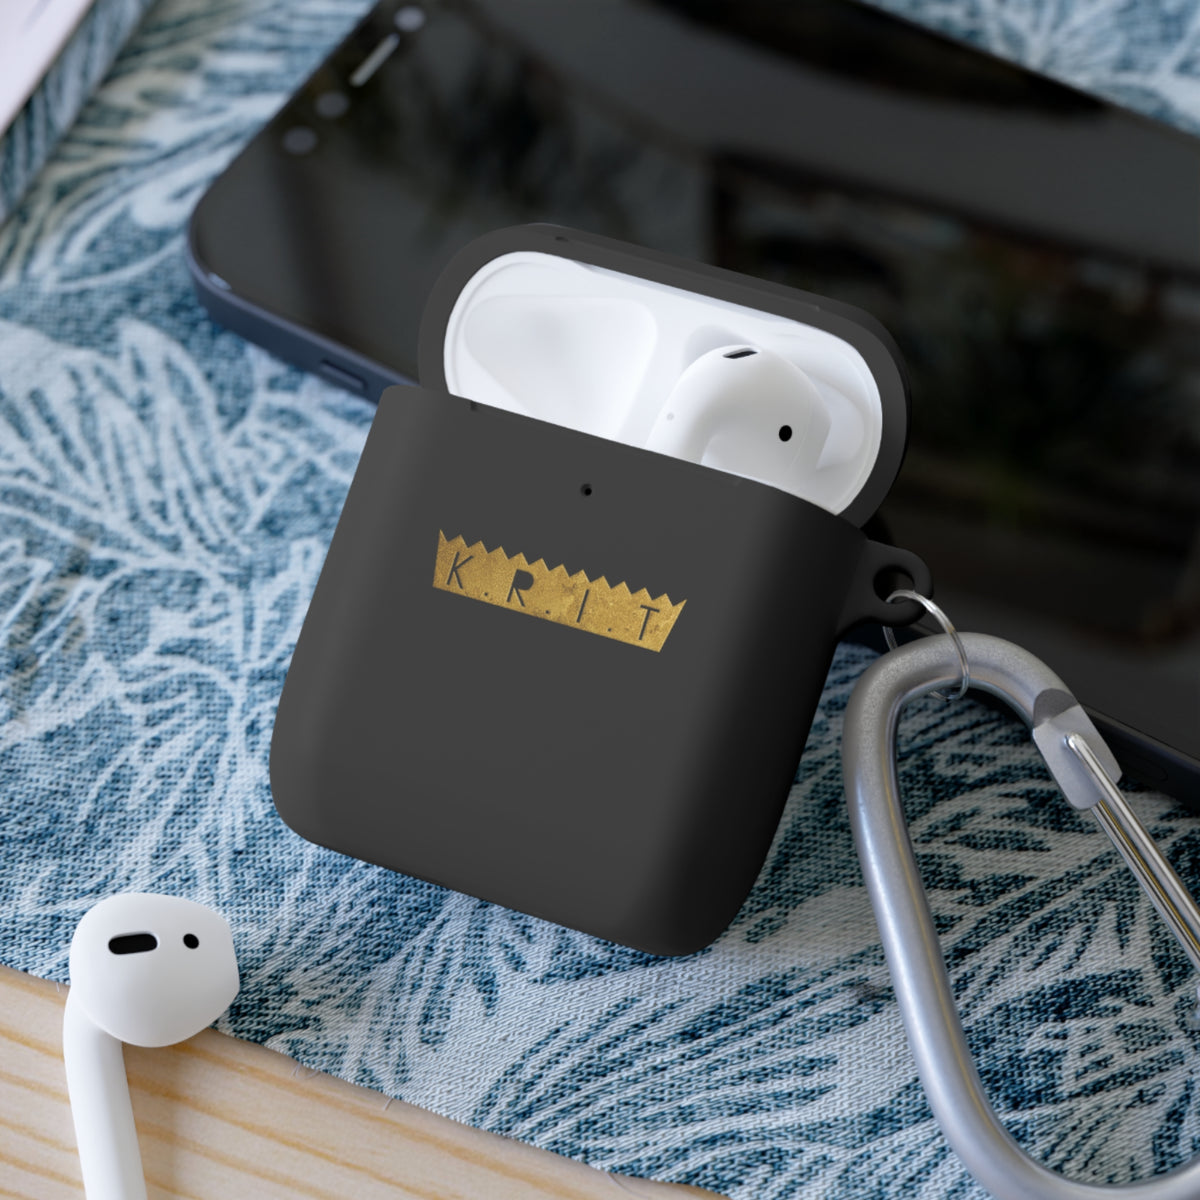 K.R.I.T. AirPods &amp; AirPods Pro Case Cover